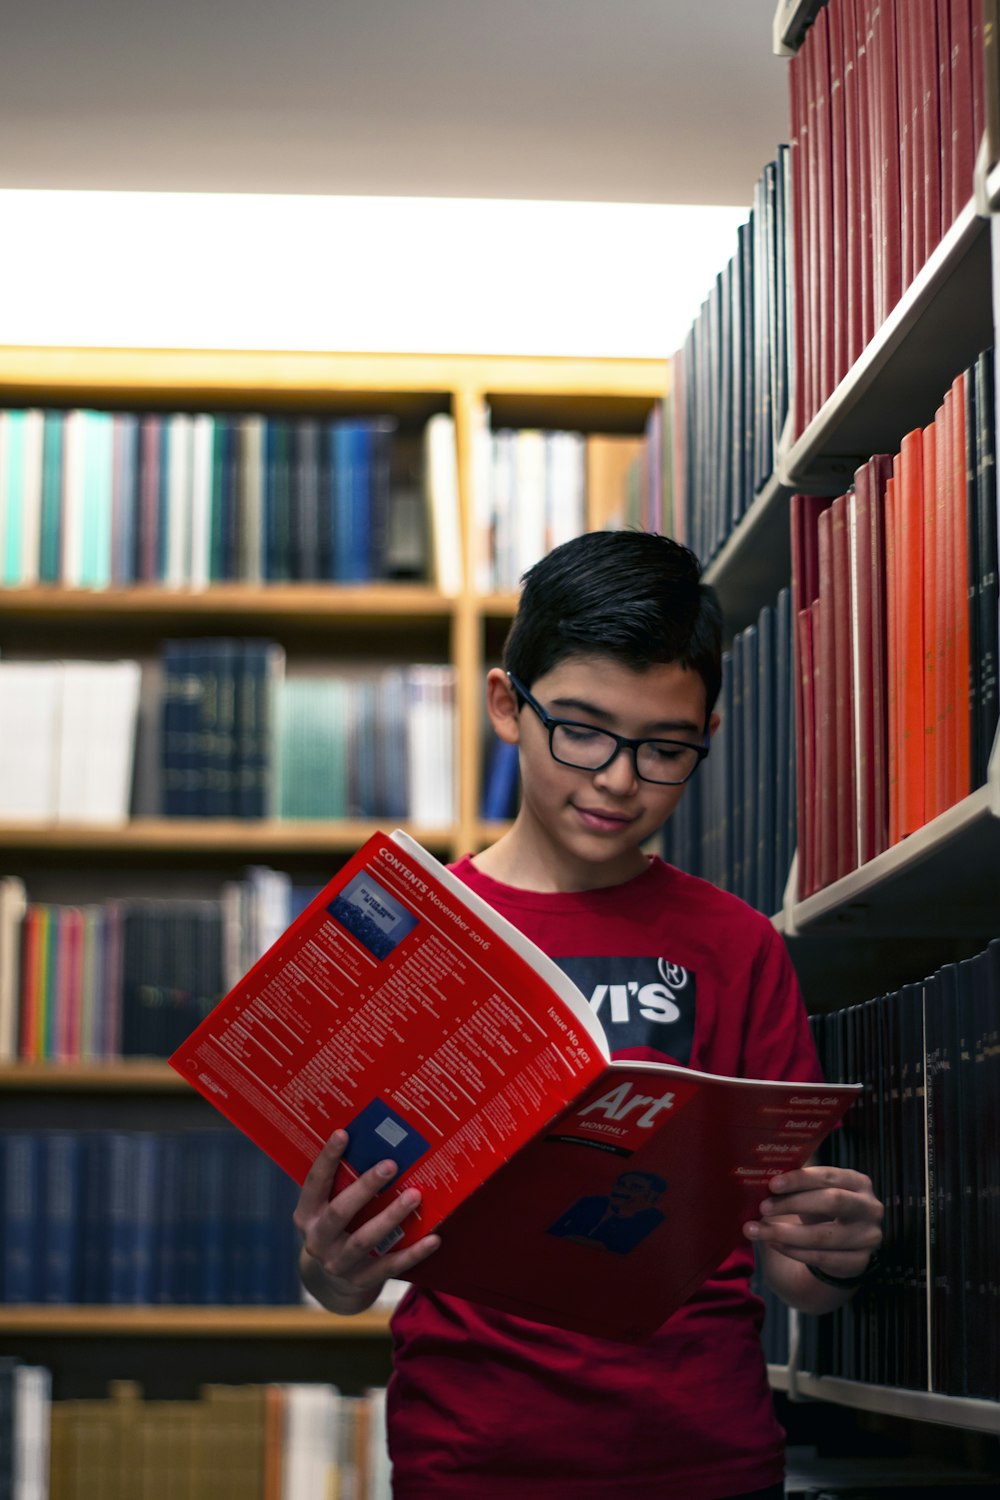 man in red crew neck shirt holding red book